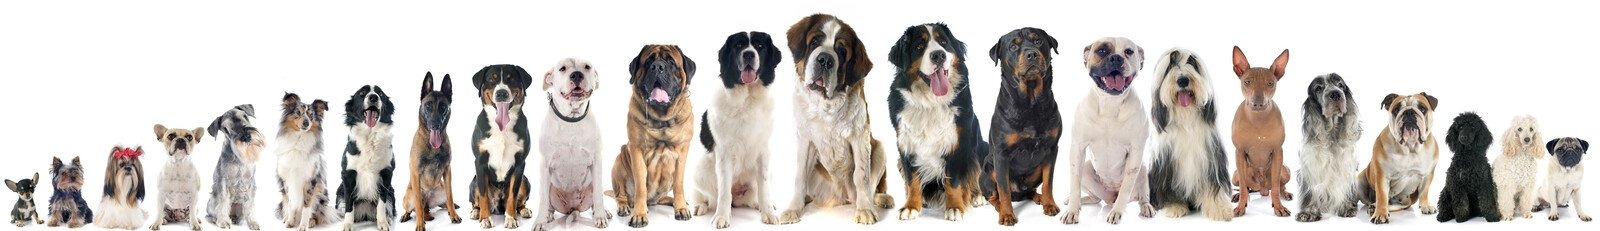 All different breeds of dogs